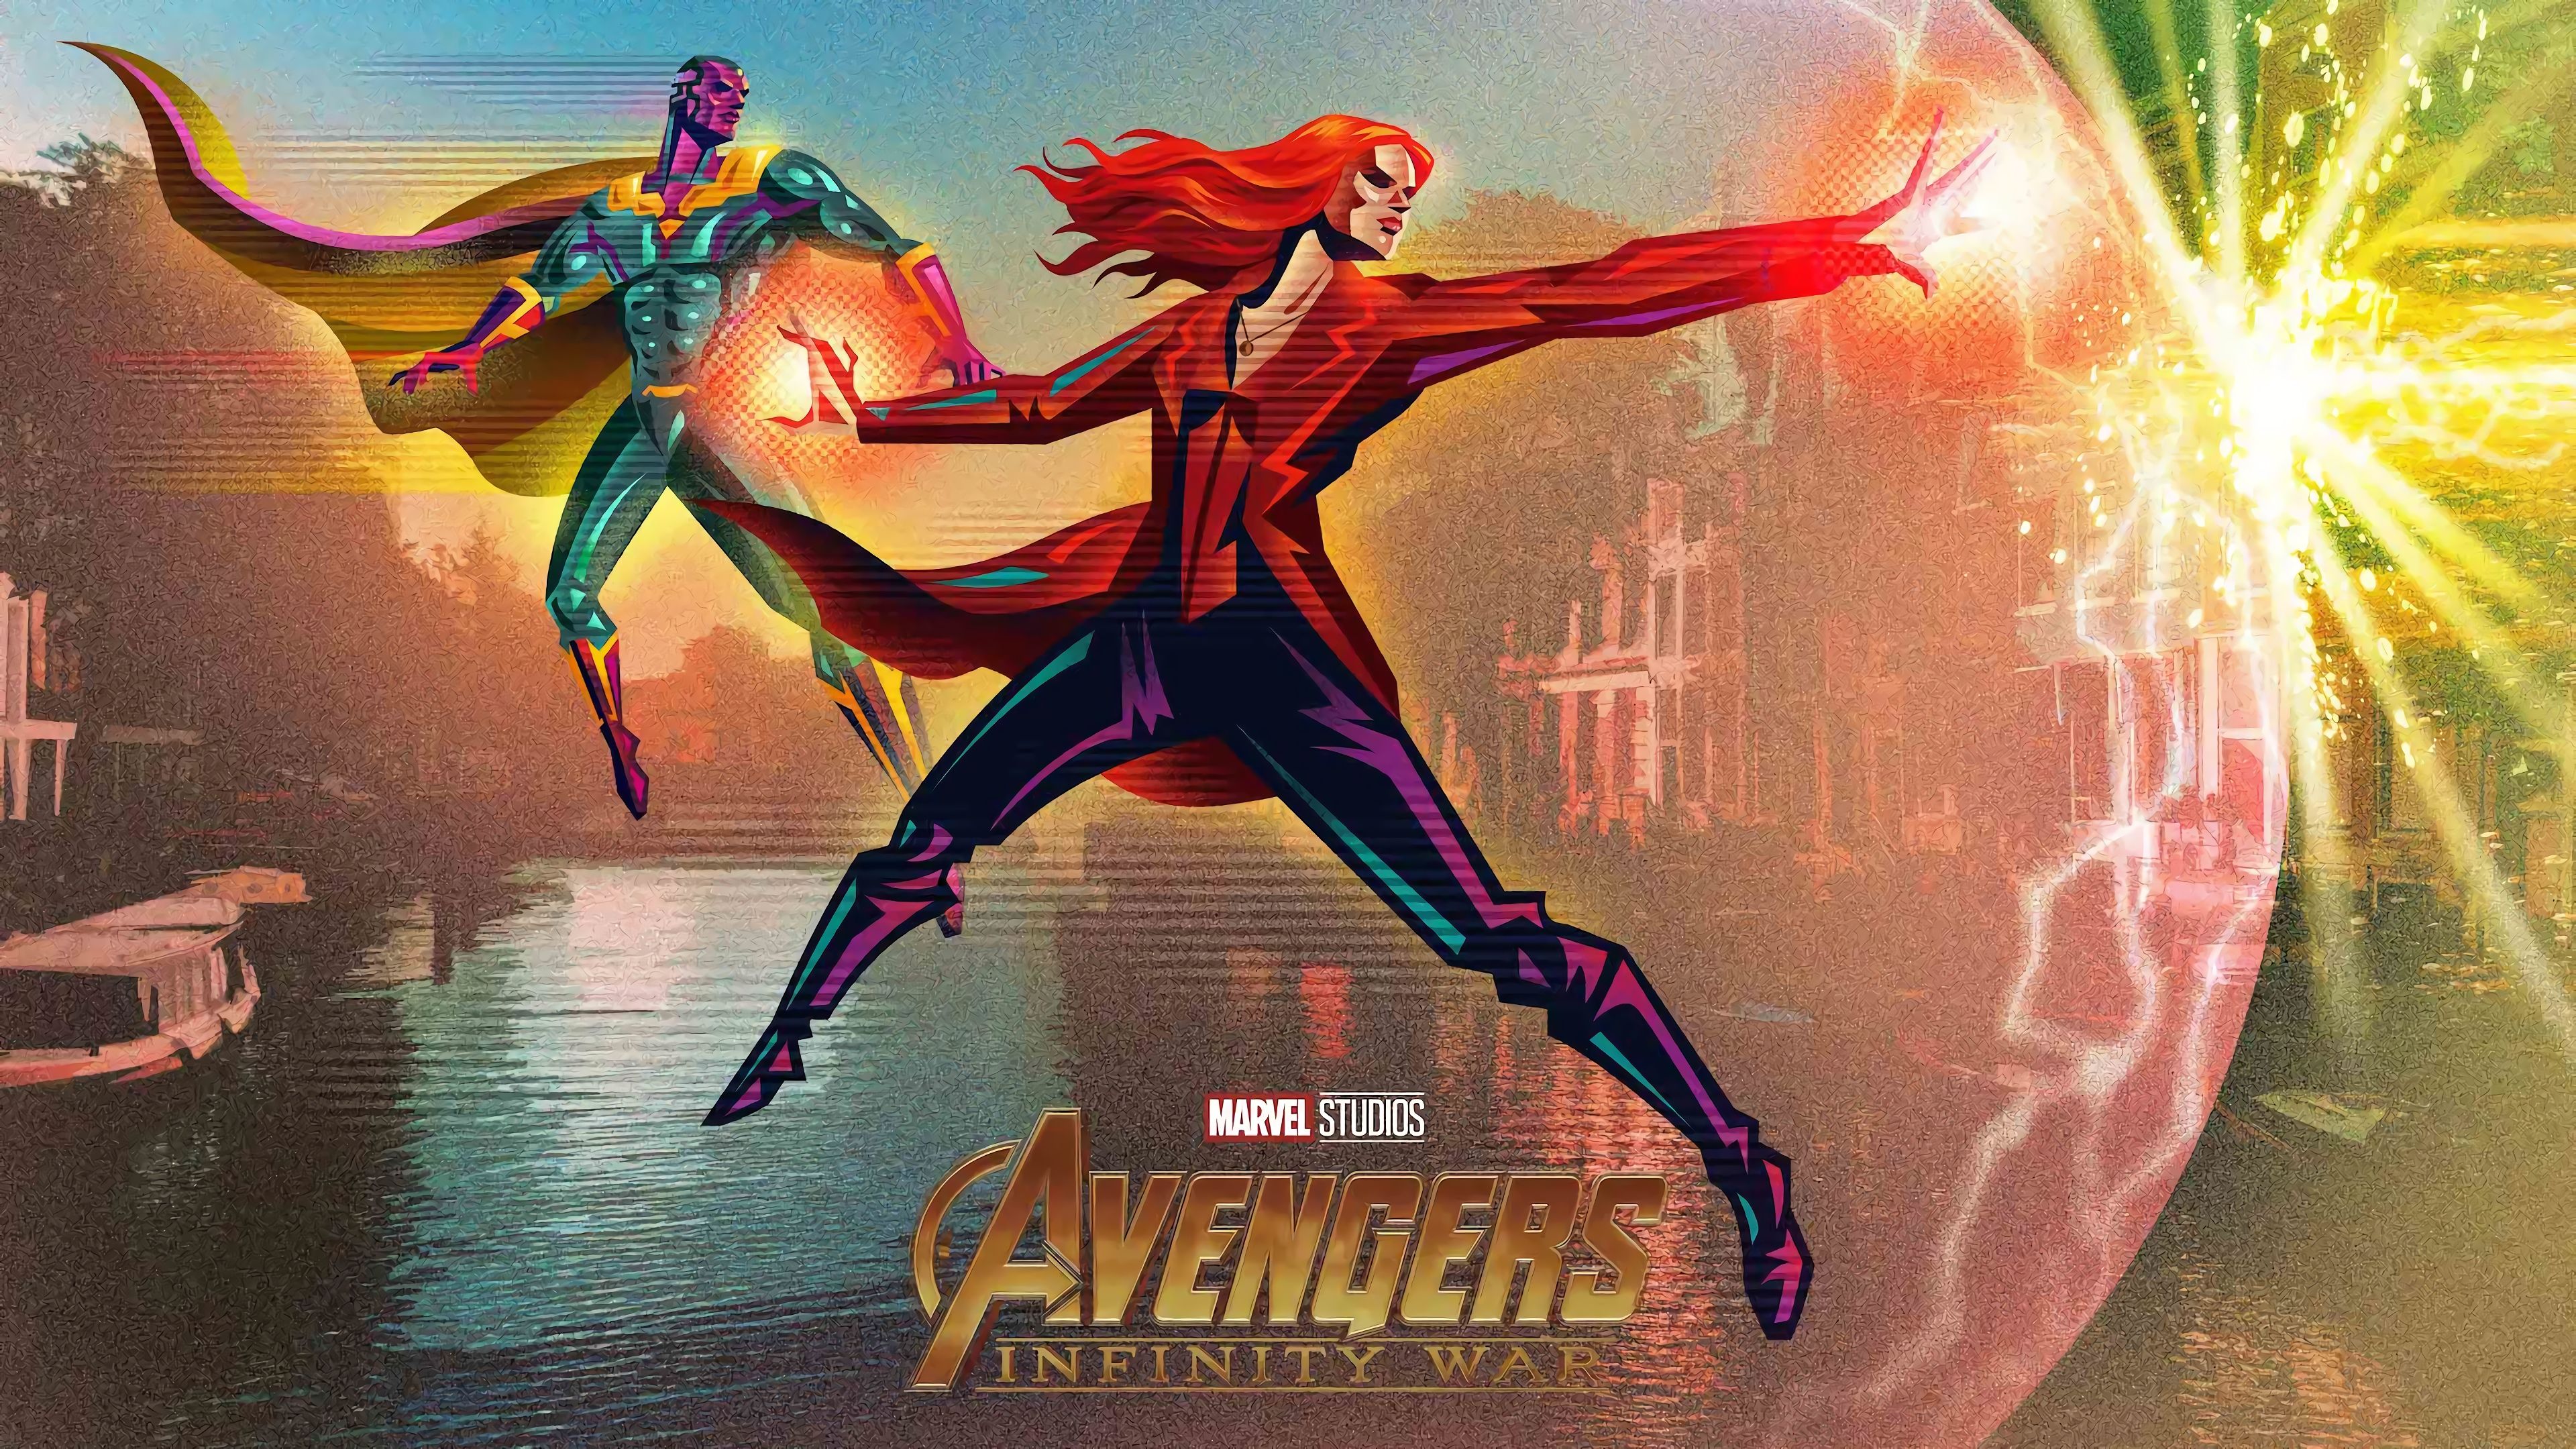 Avengers: Infinity War Scarlet Witch and Vision 4K